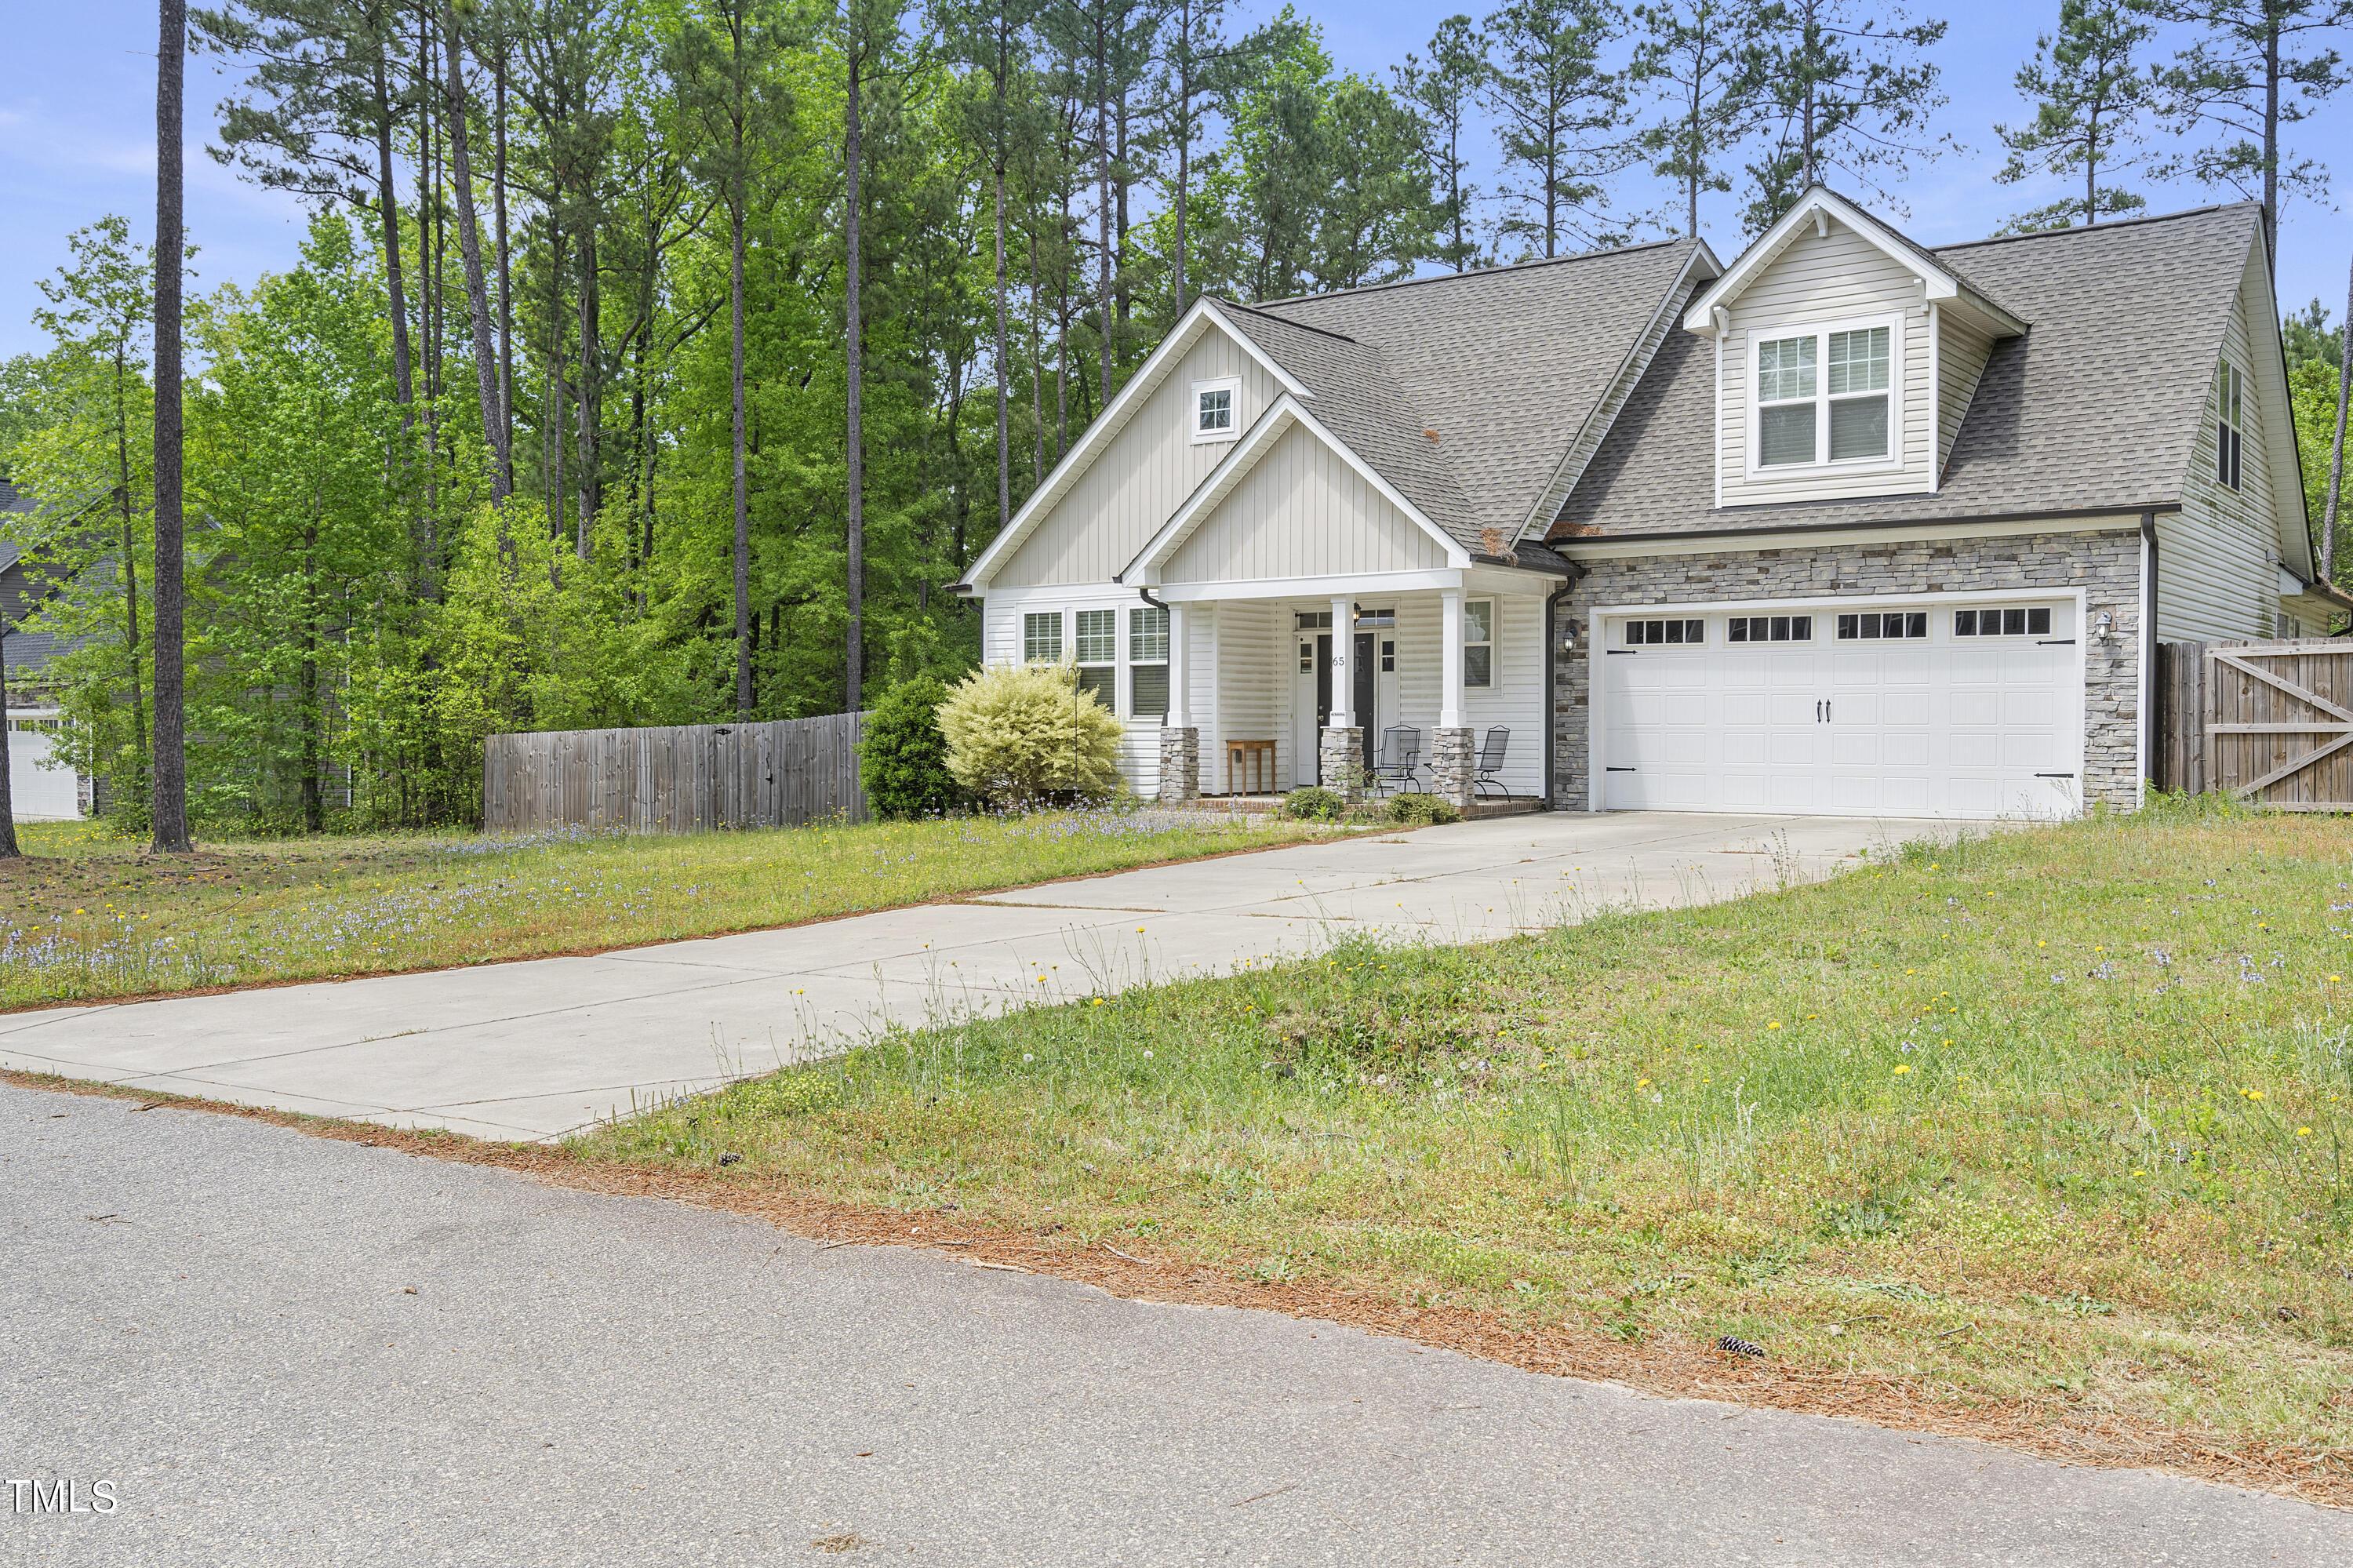 Photo one of 65 Coventry Ln Lillington NC 27546 | MLS 10024792